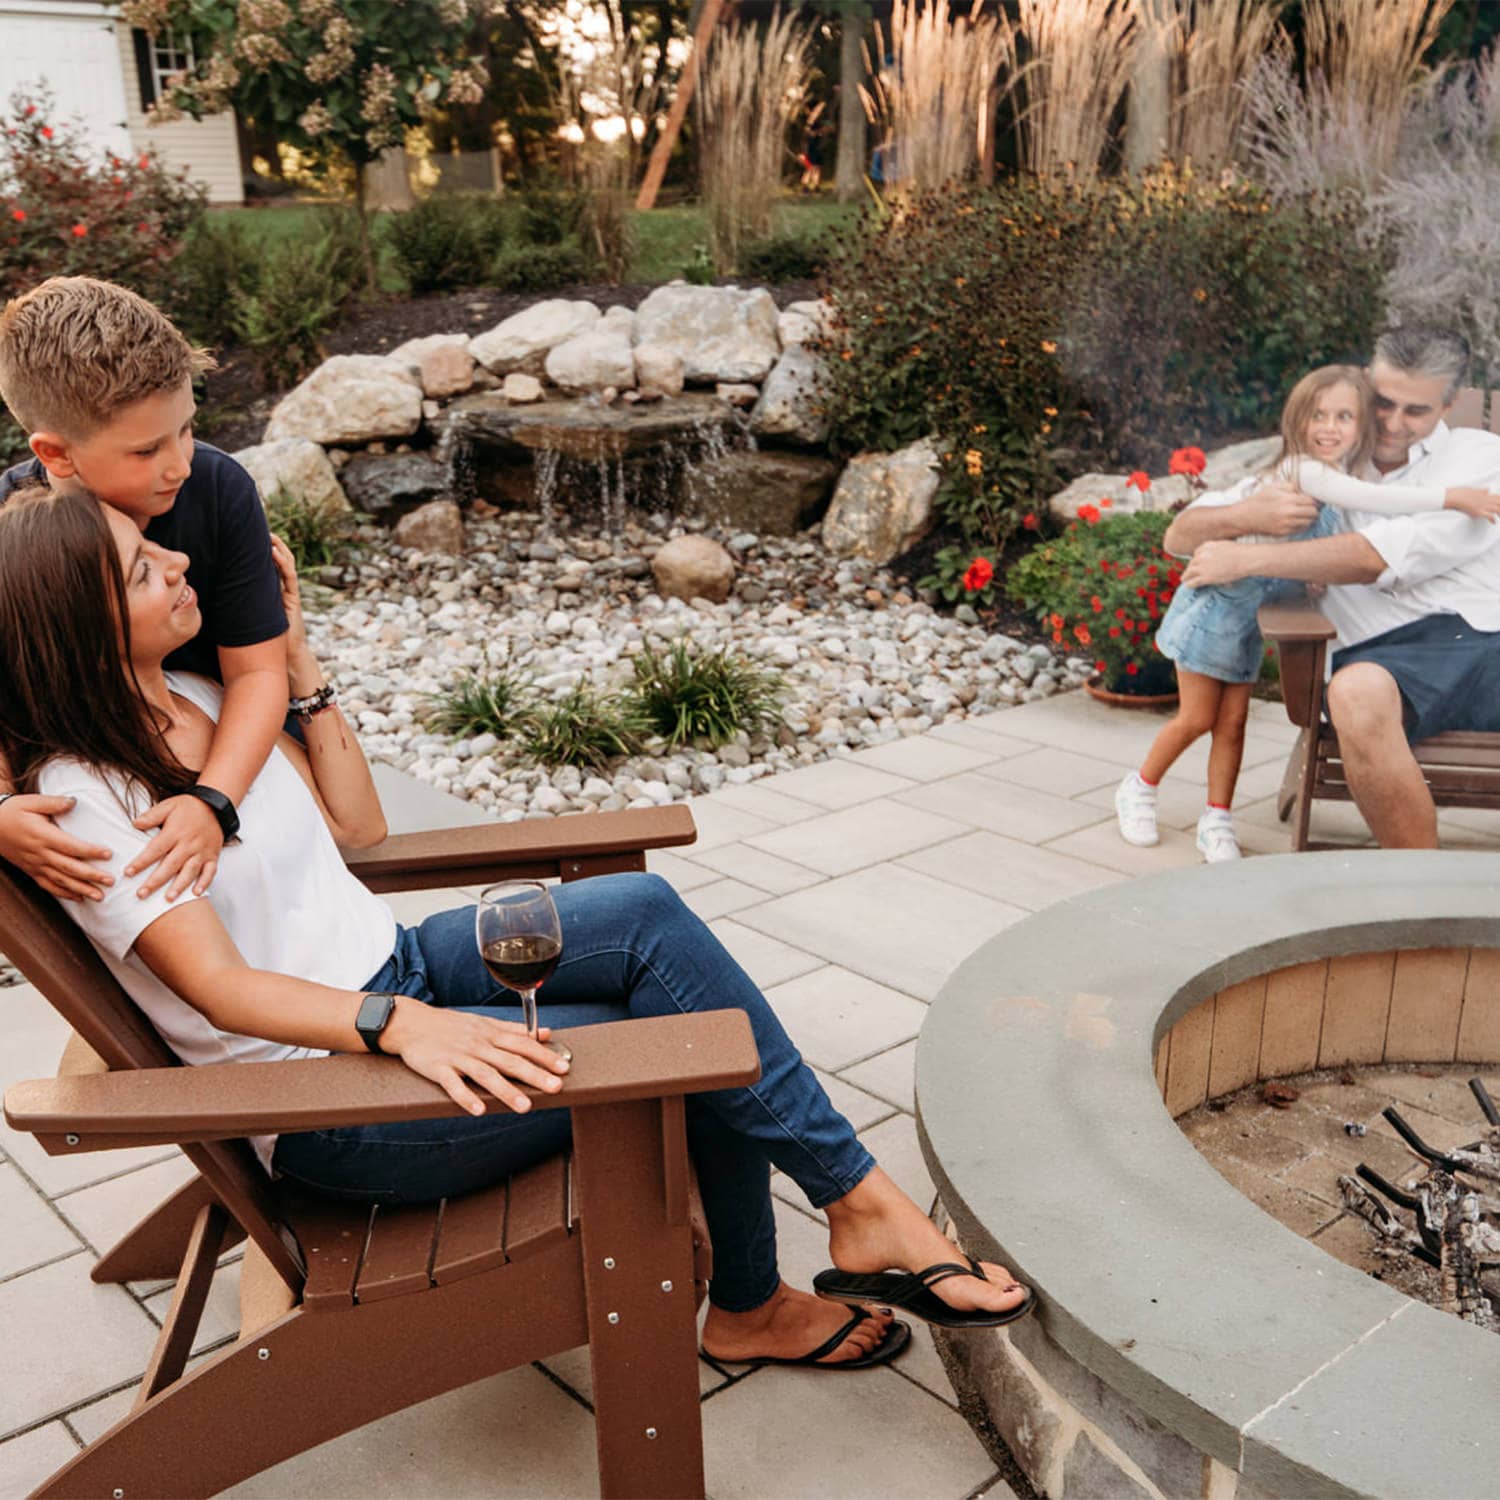 There is no arguing that quality family time by the fire pit are some of the best times!